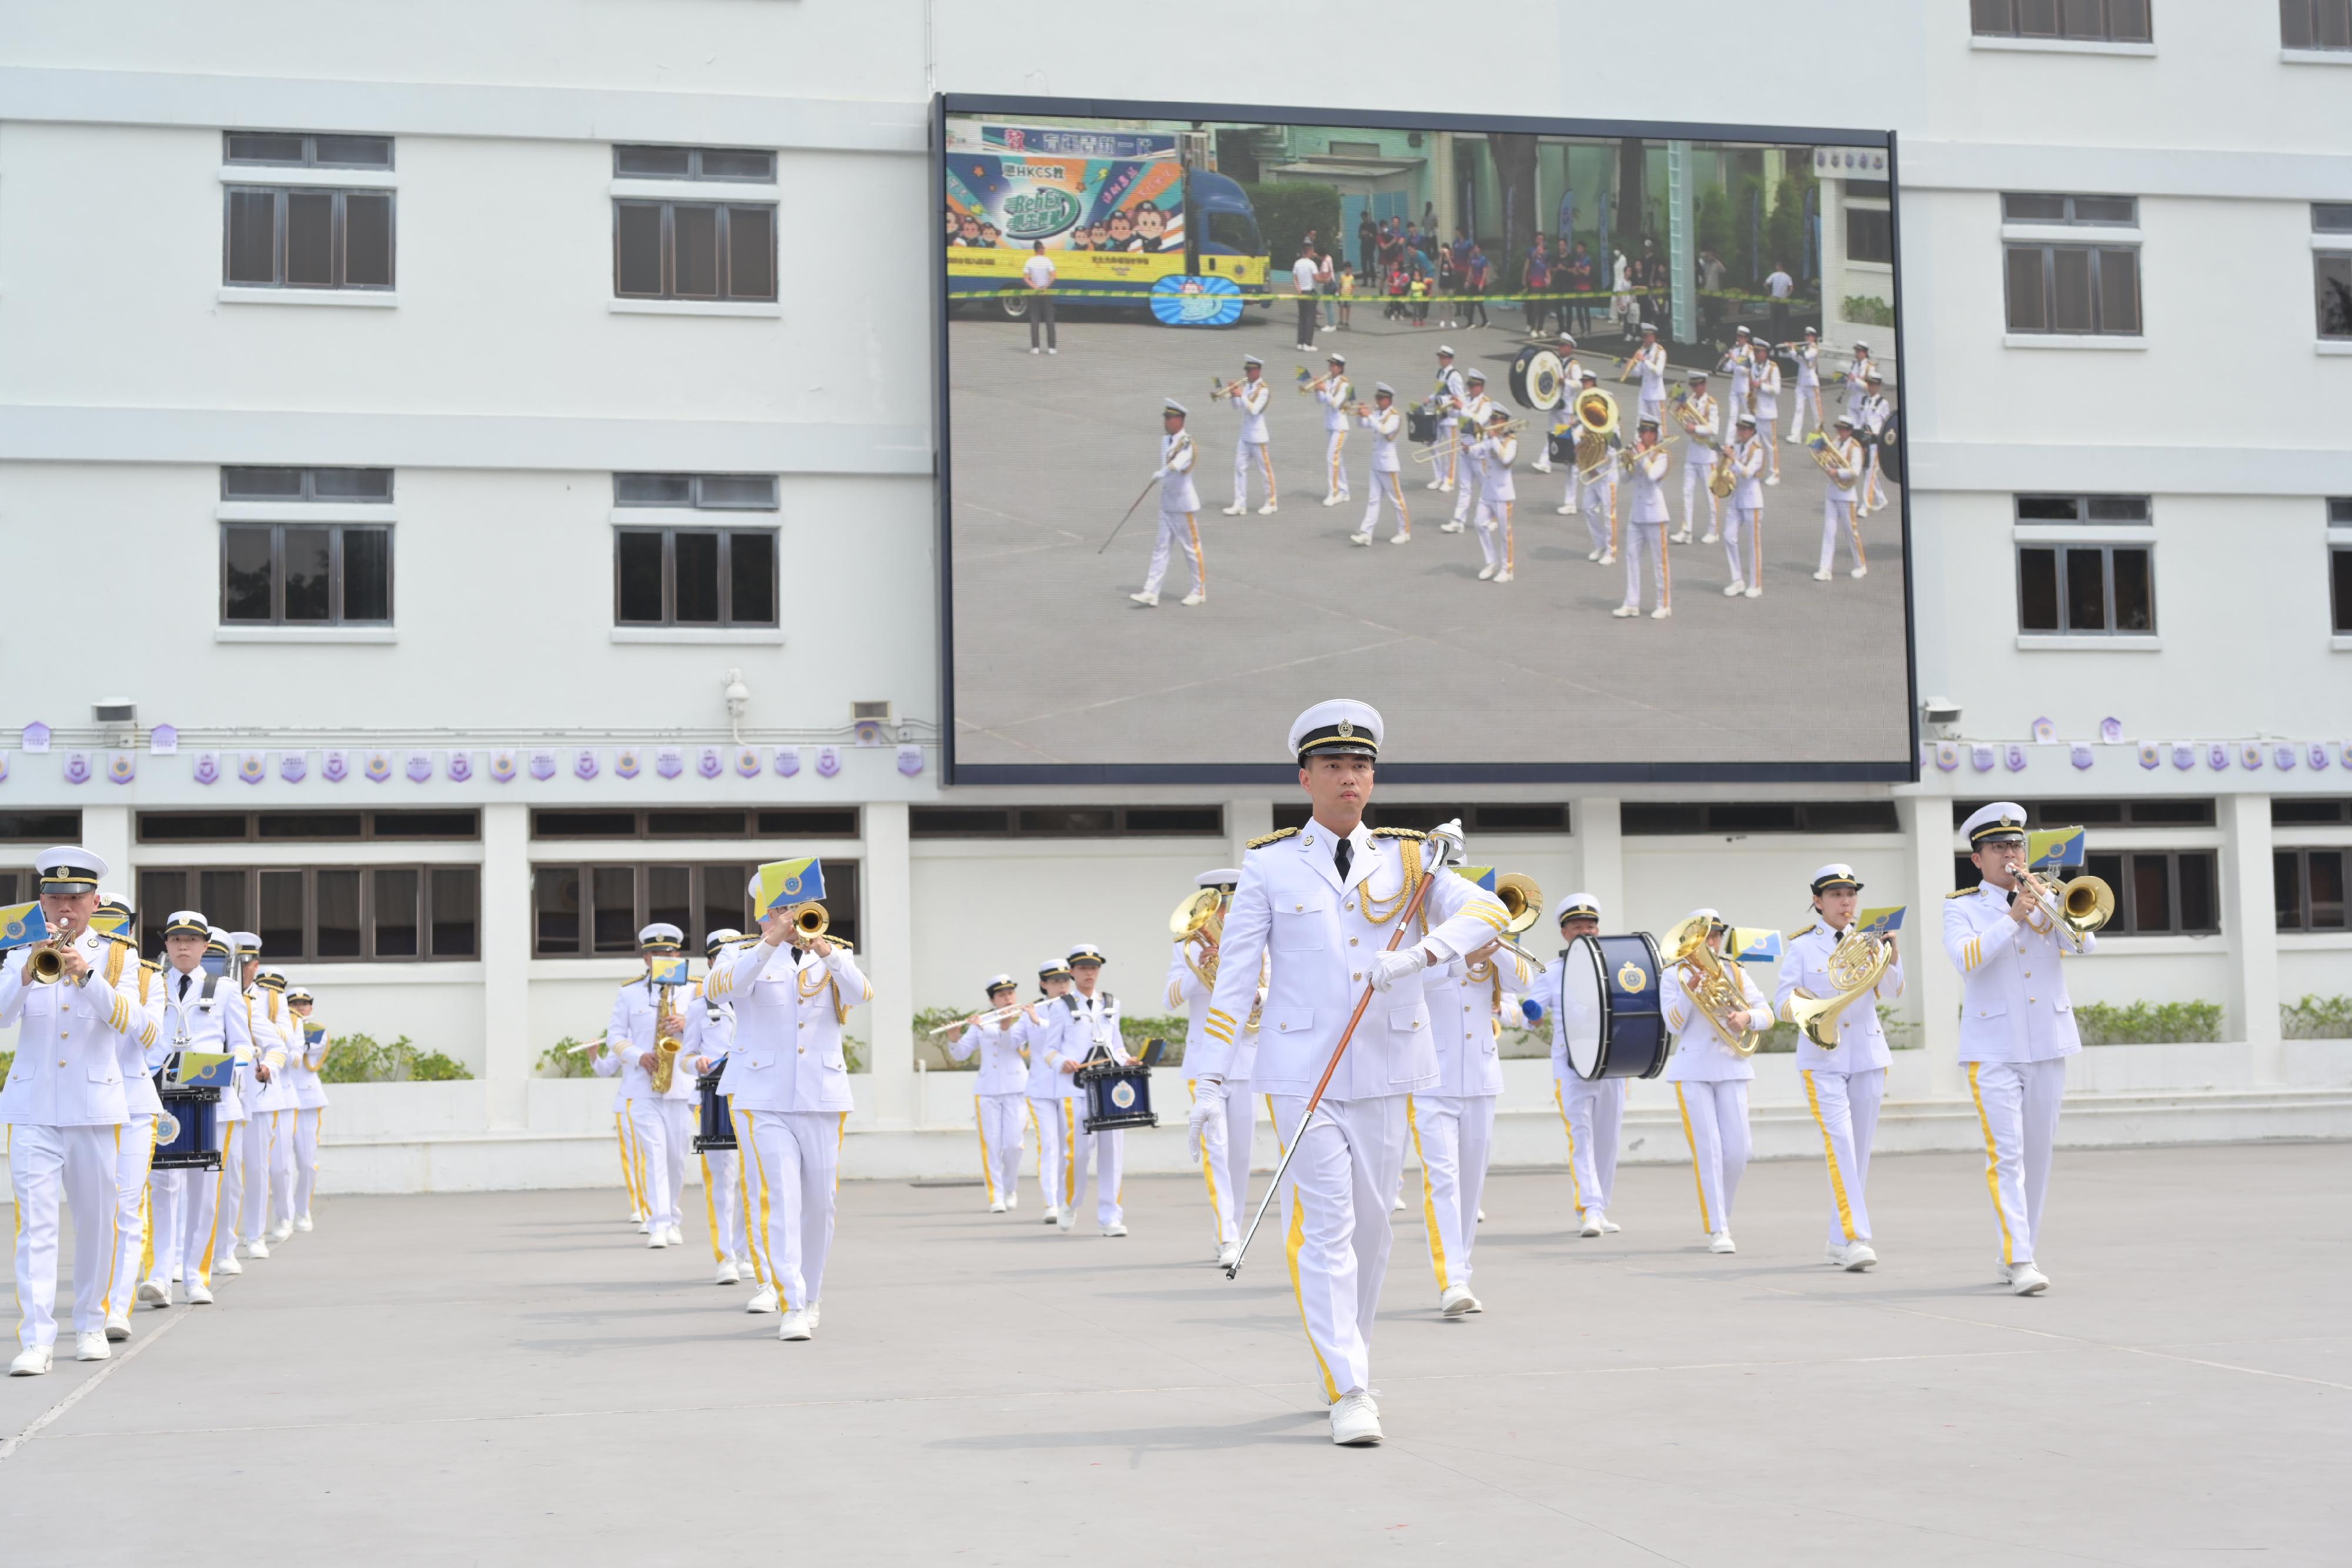 The Correctional Services Department held an open day at the Hong Kong Correctional Services Academy today (April 15), the National Security Education Day, to deepen the public's understanding of national security and the work of the department, including its work and effectiveness in safeguarding national security. Photo shows a music performance by the Marching Band.